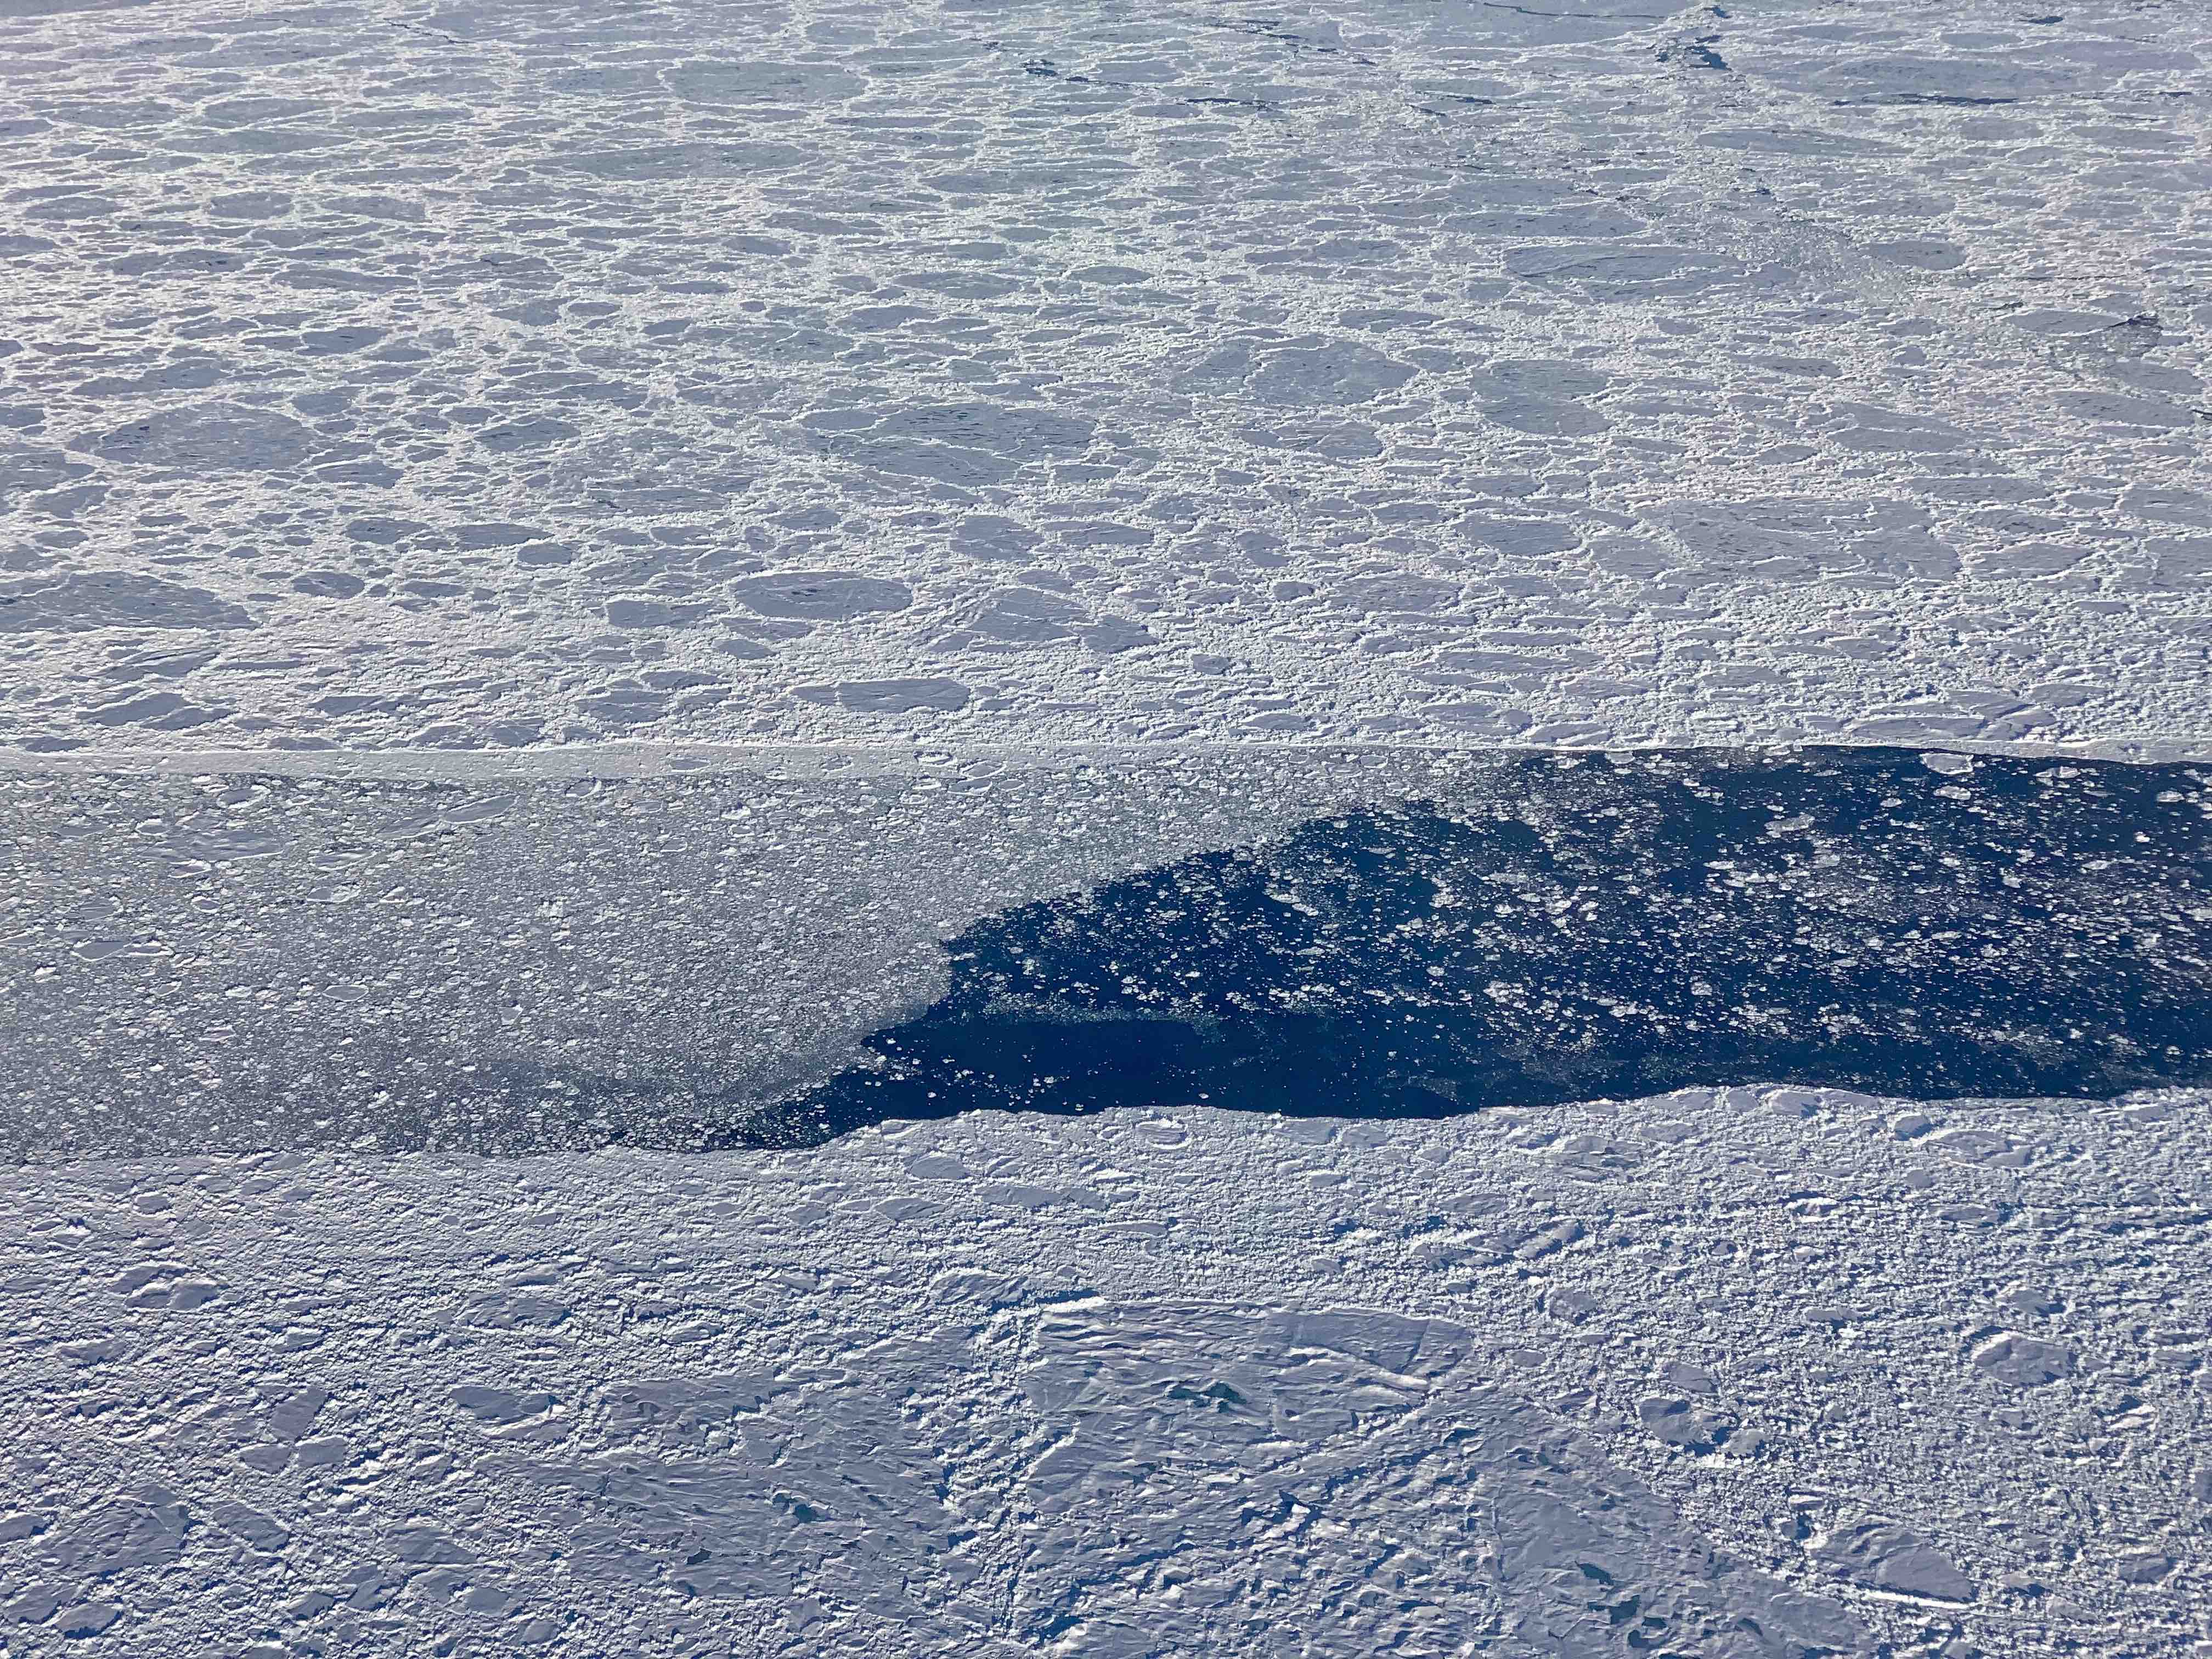 An expanse of rumpled, white sea ice with an opening exposing dark blue ocean water.